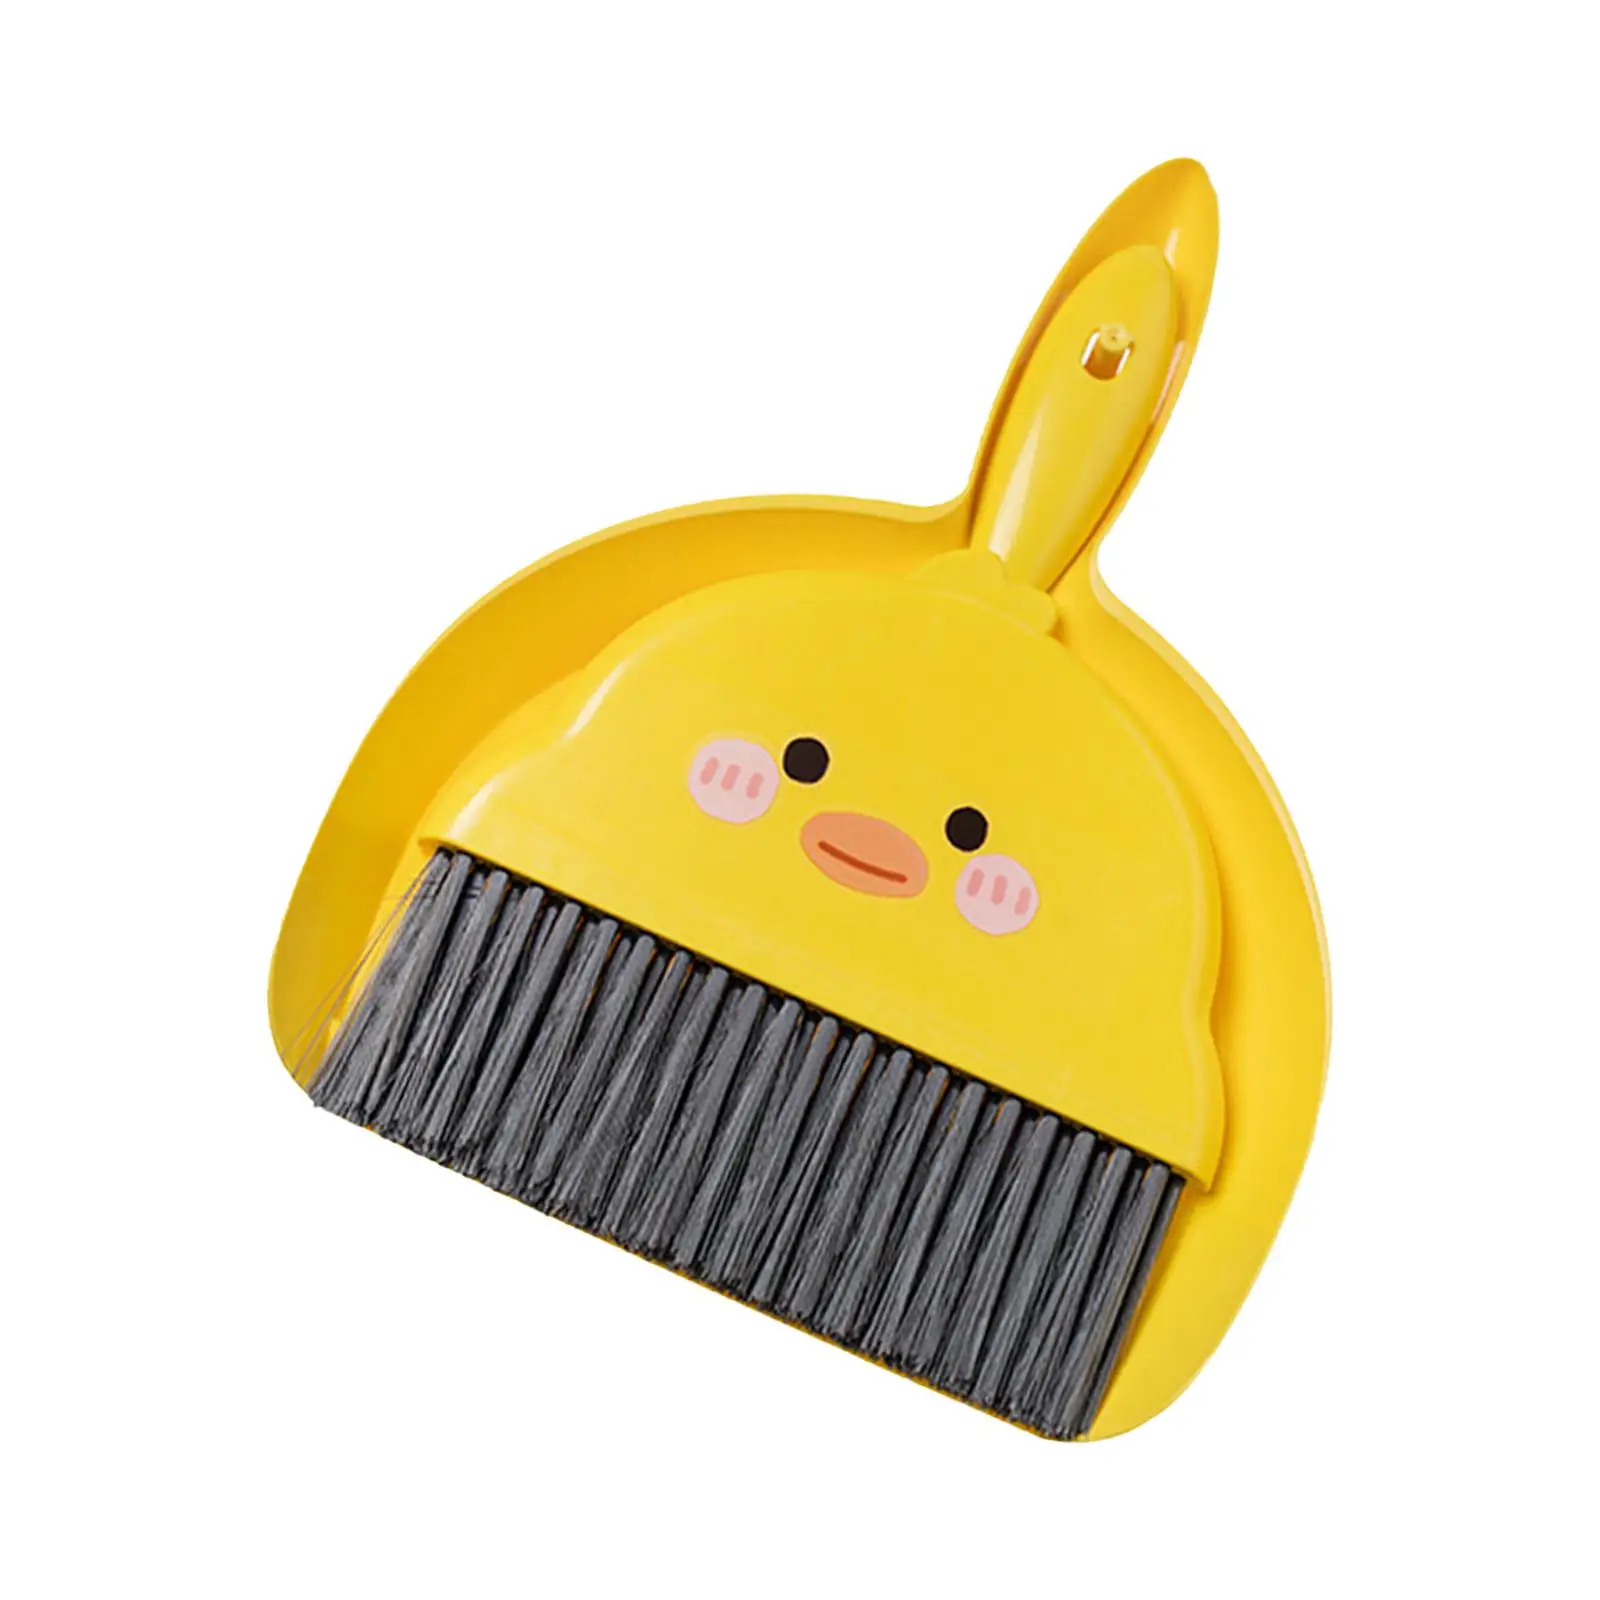 Mini Broom and Dustpan Set Desktop Mini Broom Dustpan Suit for Sofa Cleaning Bed for Girls Boys Housekeeping Play Set Gift